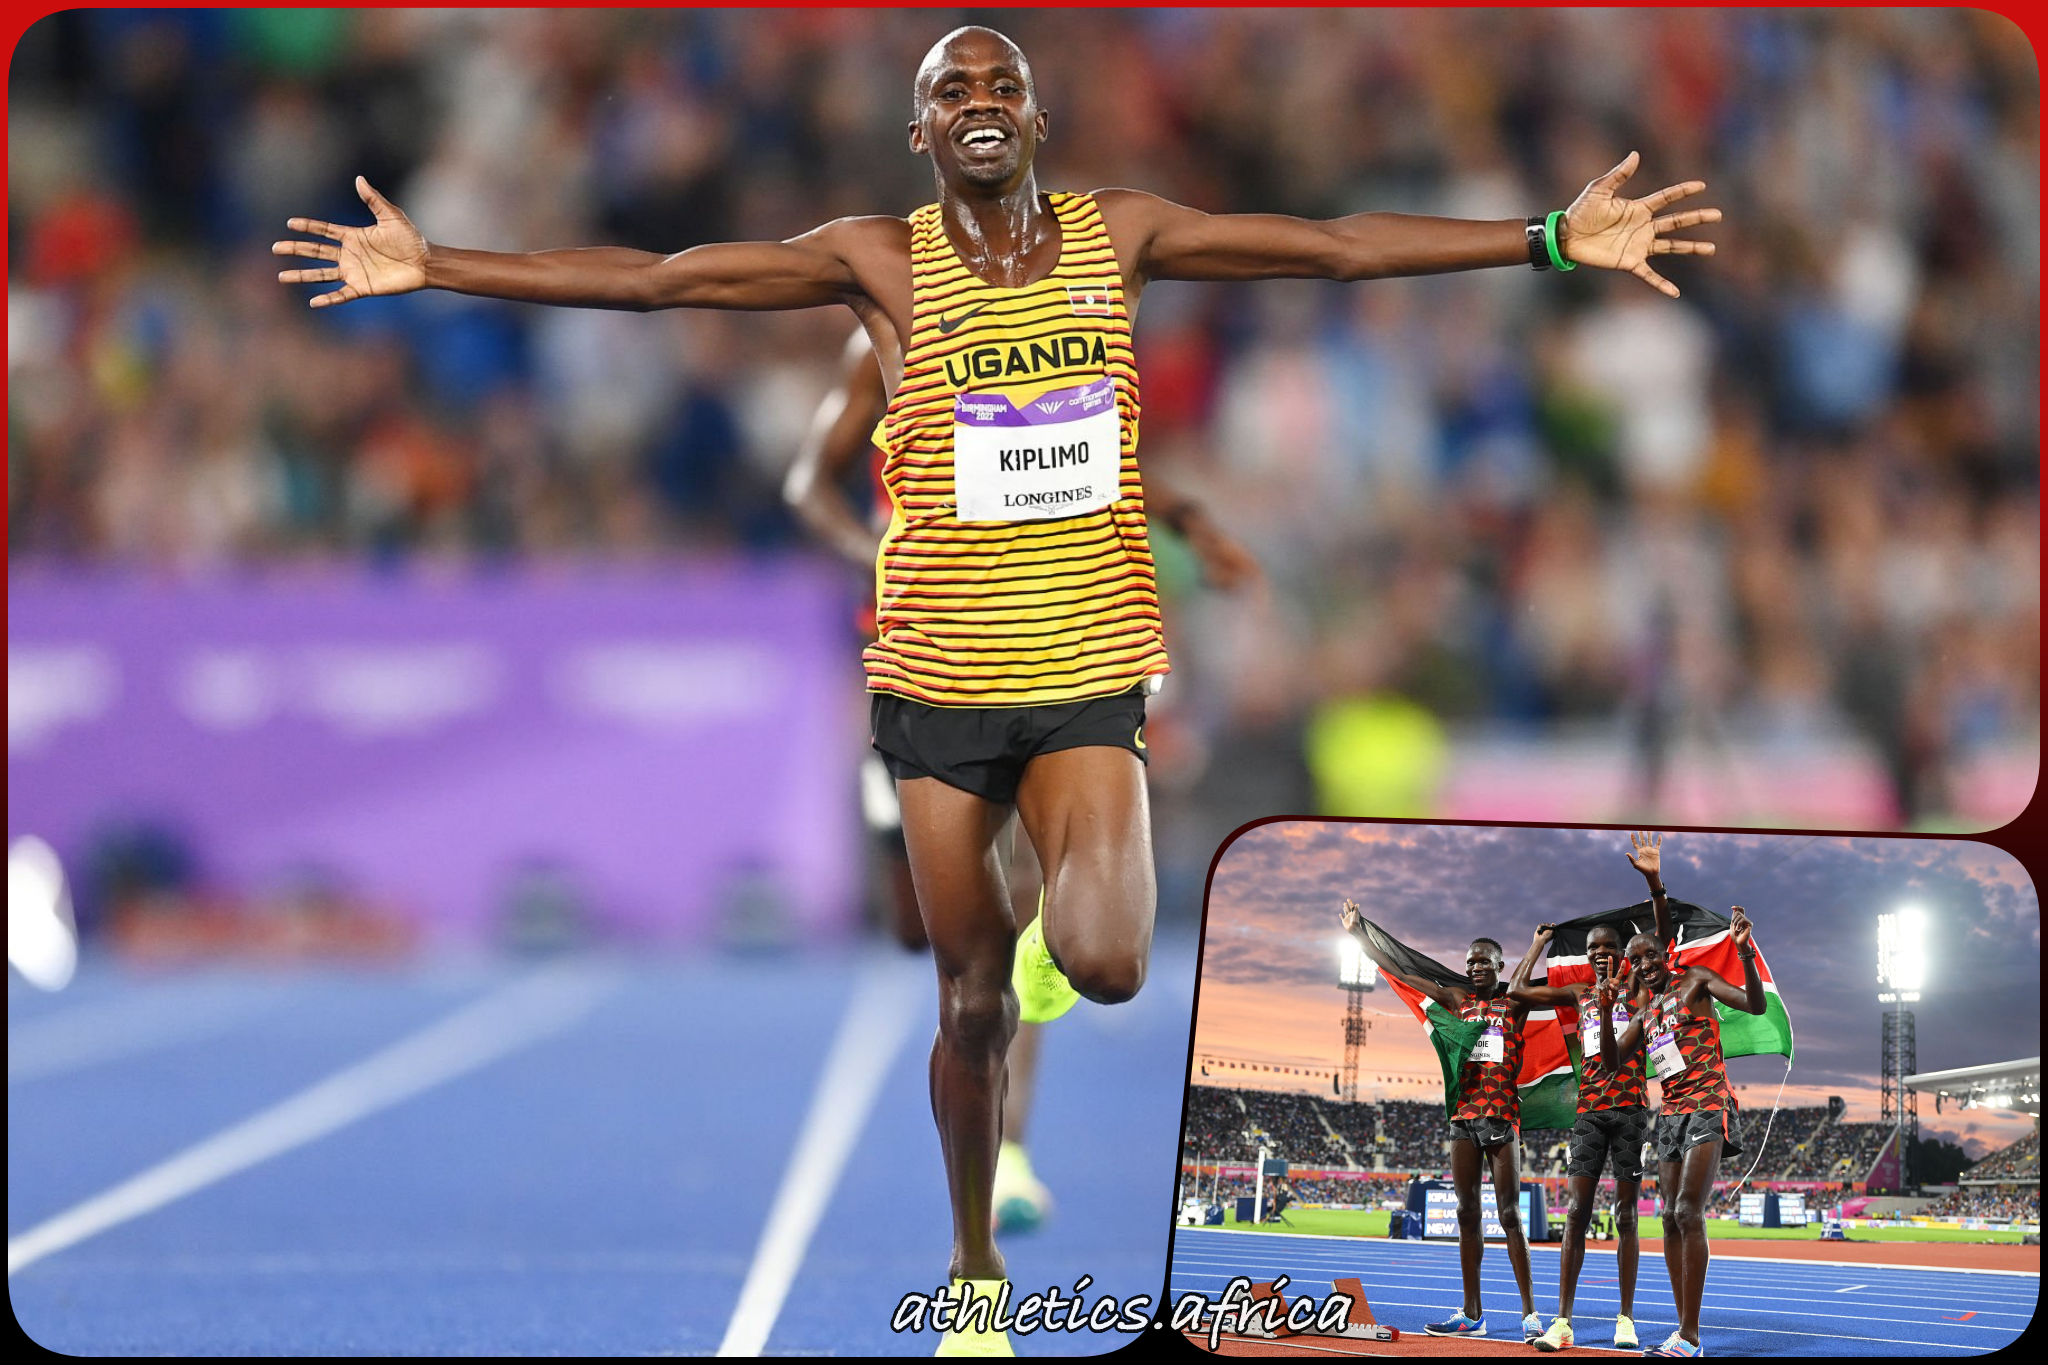 Jacob Kiplimo of Team Uganda celebrates winning the Gold medal as they cross the finish line in the Men's 10,000m Final on day five of the Birmingham 2022 Commonwealth Games at Alexander Stadium on August 02, 2022 in the Birmingham, England. (Photo by Michael Steele/Getty Images)